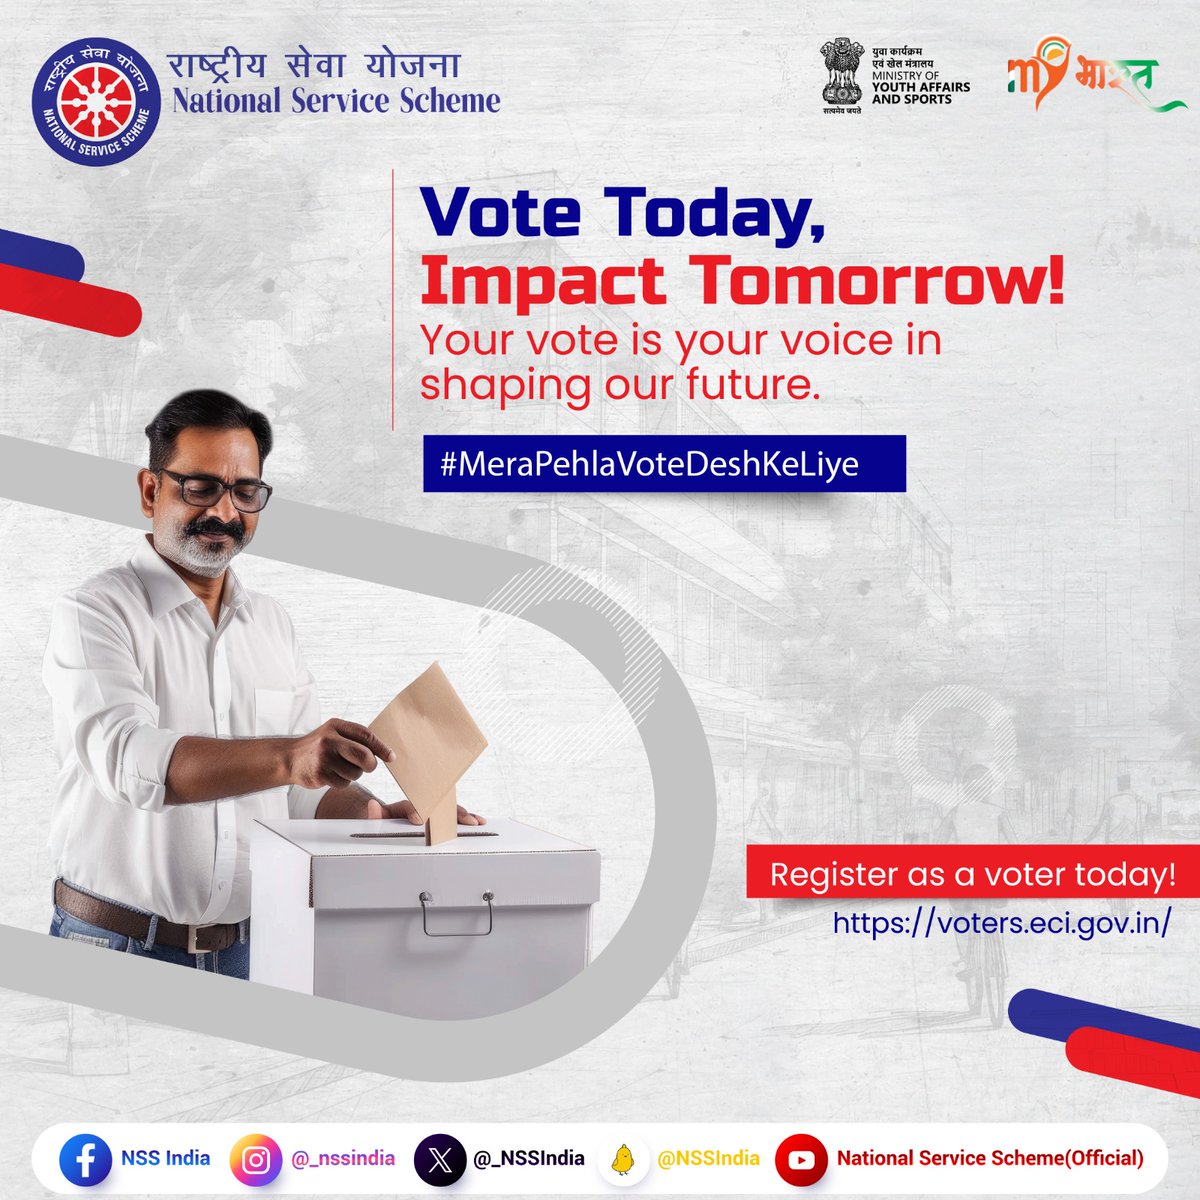 Remember, every vote counts and together, our votes create waves of change! #voterawareness #MeraPehlaVoteDeshKeLiye #Vote4Sure